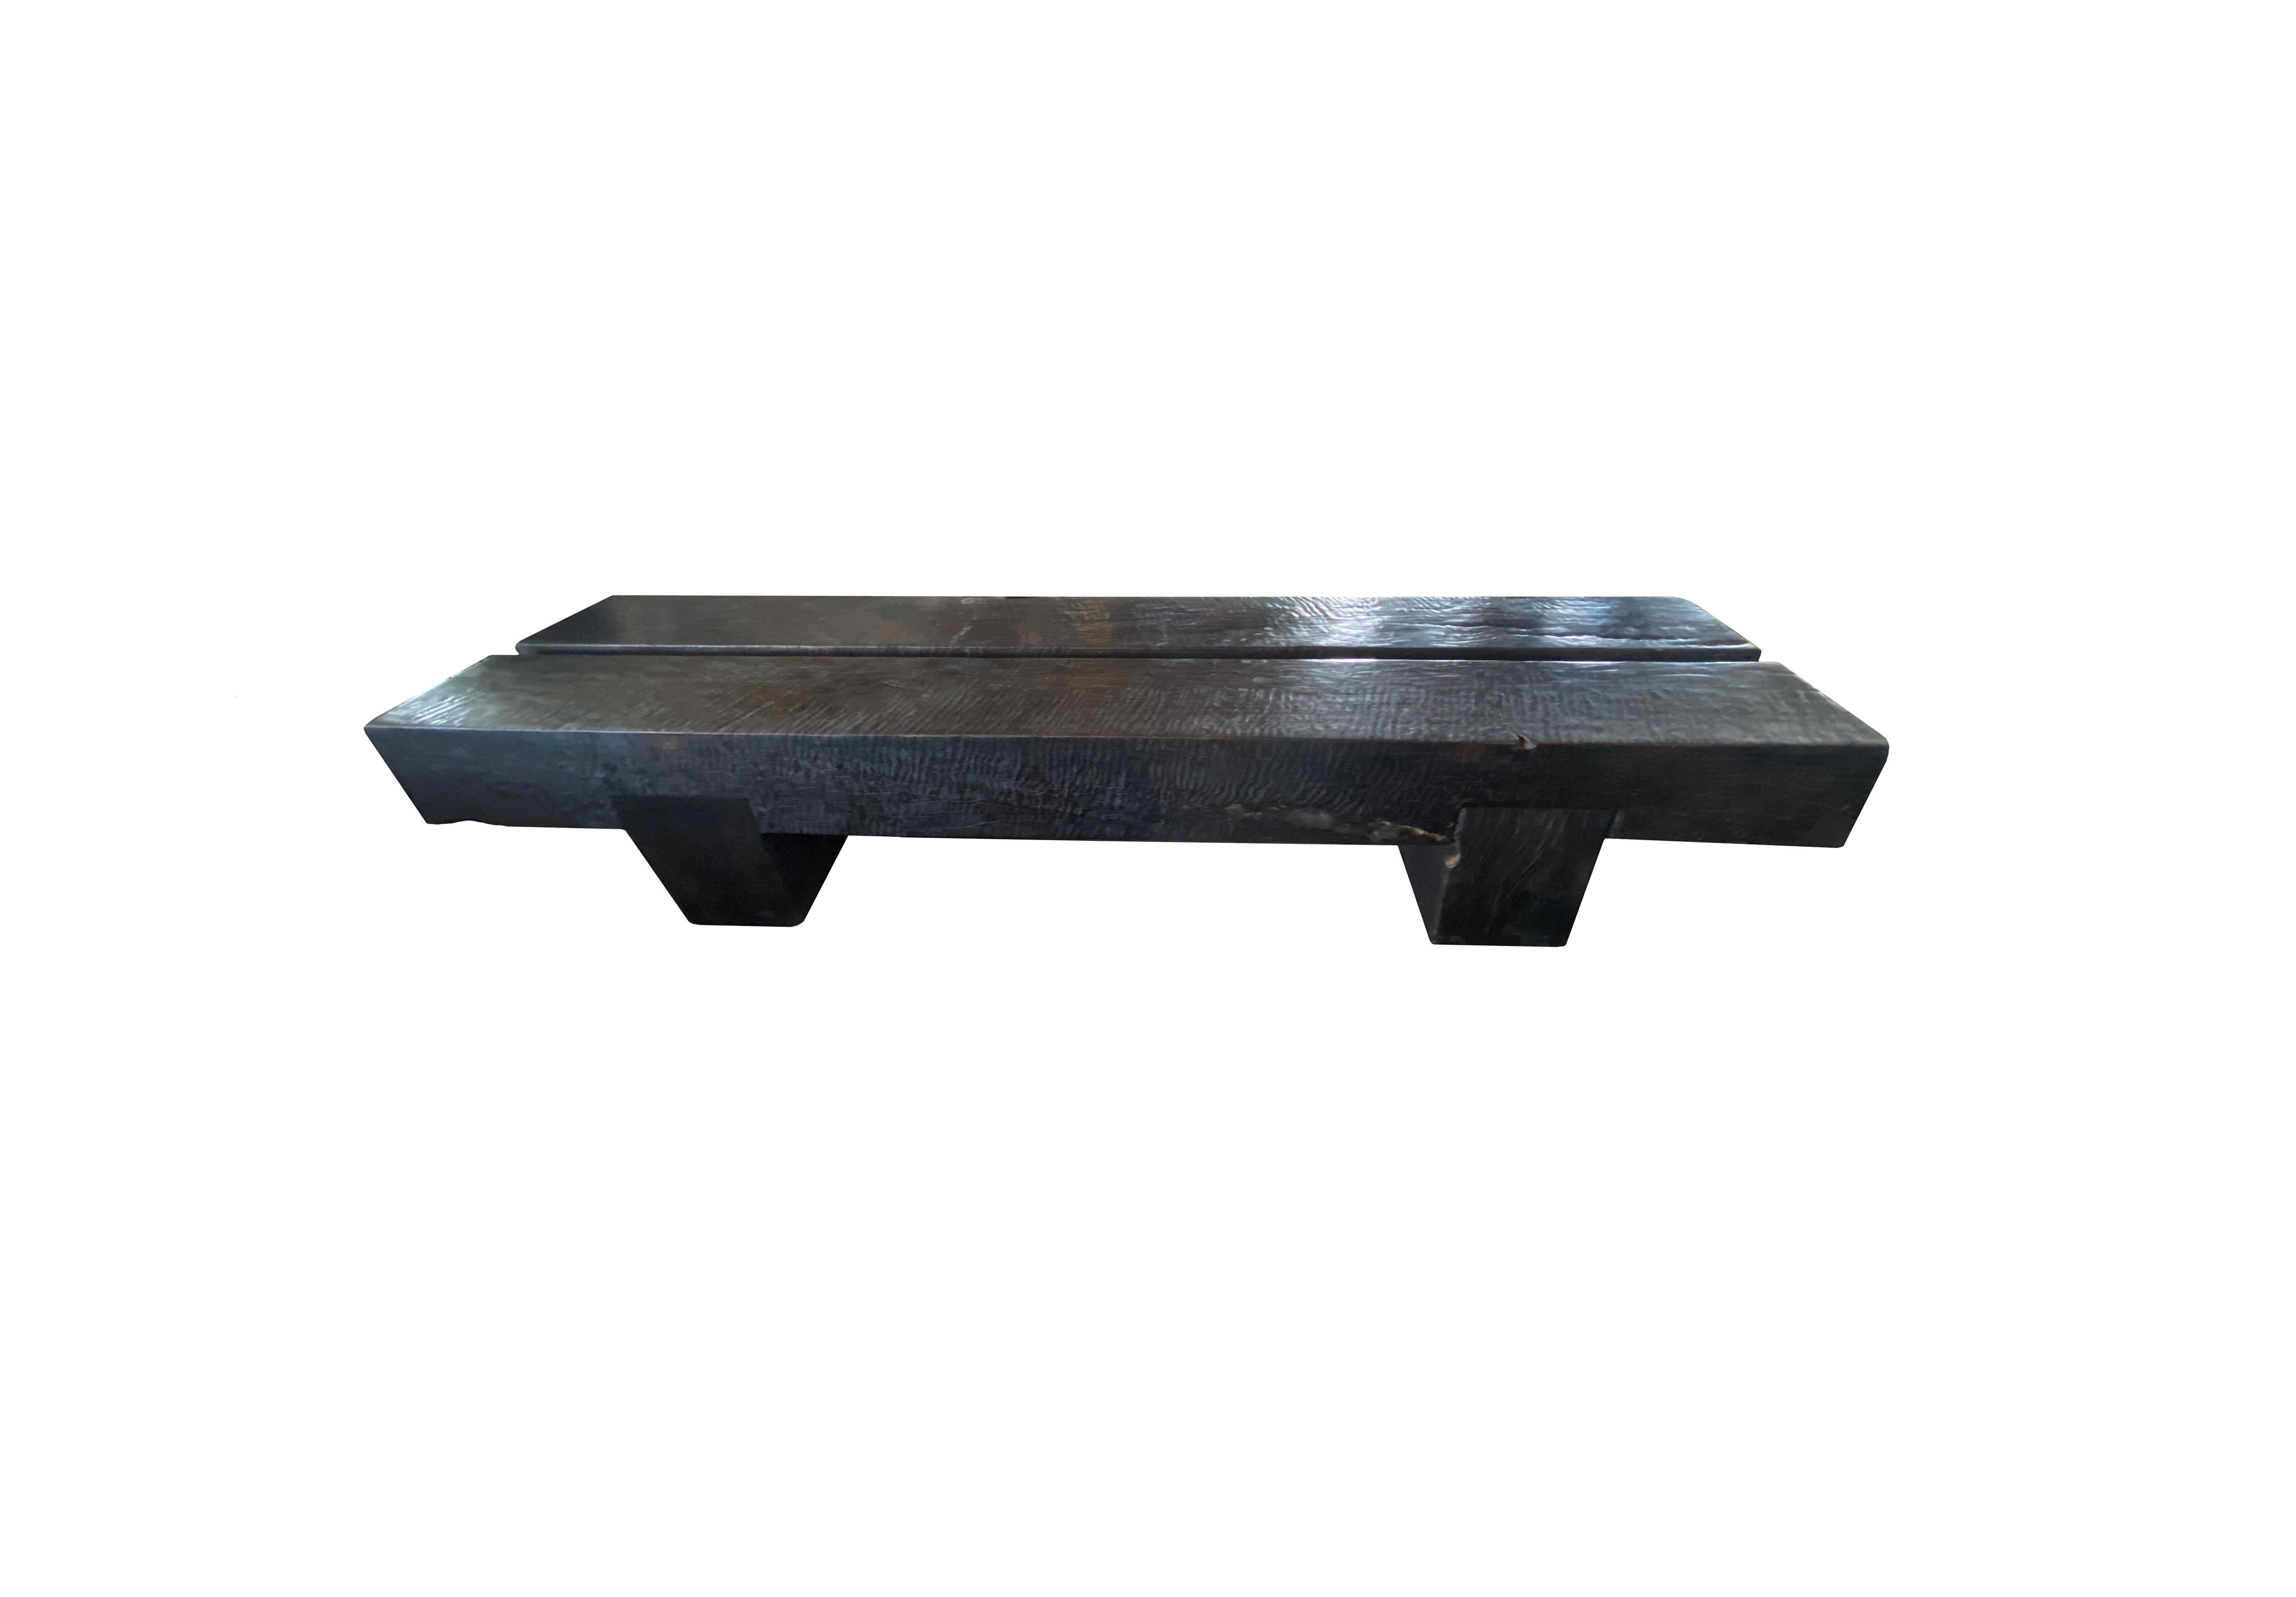 A sculptural solid mango wood bench. To achieve is rich black pigment the bench was burnt three times and then finished with a clear coat. The myriad of textures make for a very elegant bench. A wonderful addition to any space.  It features a